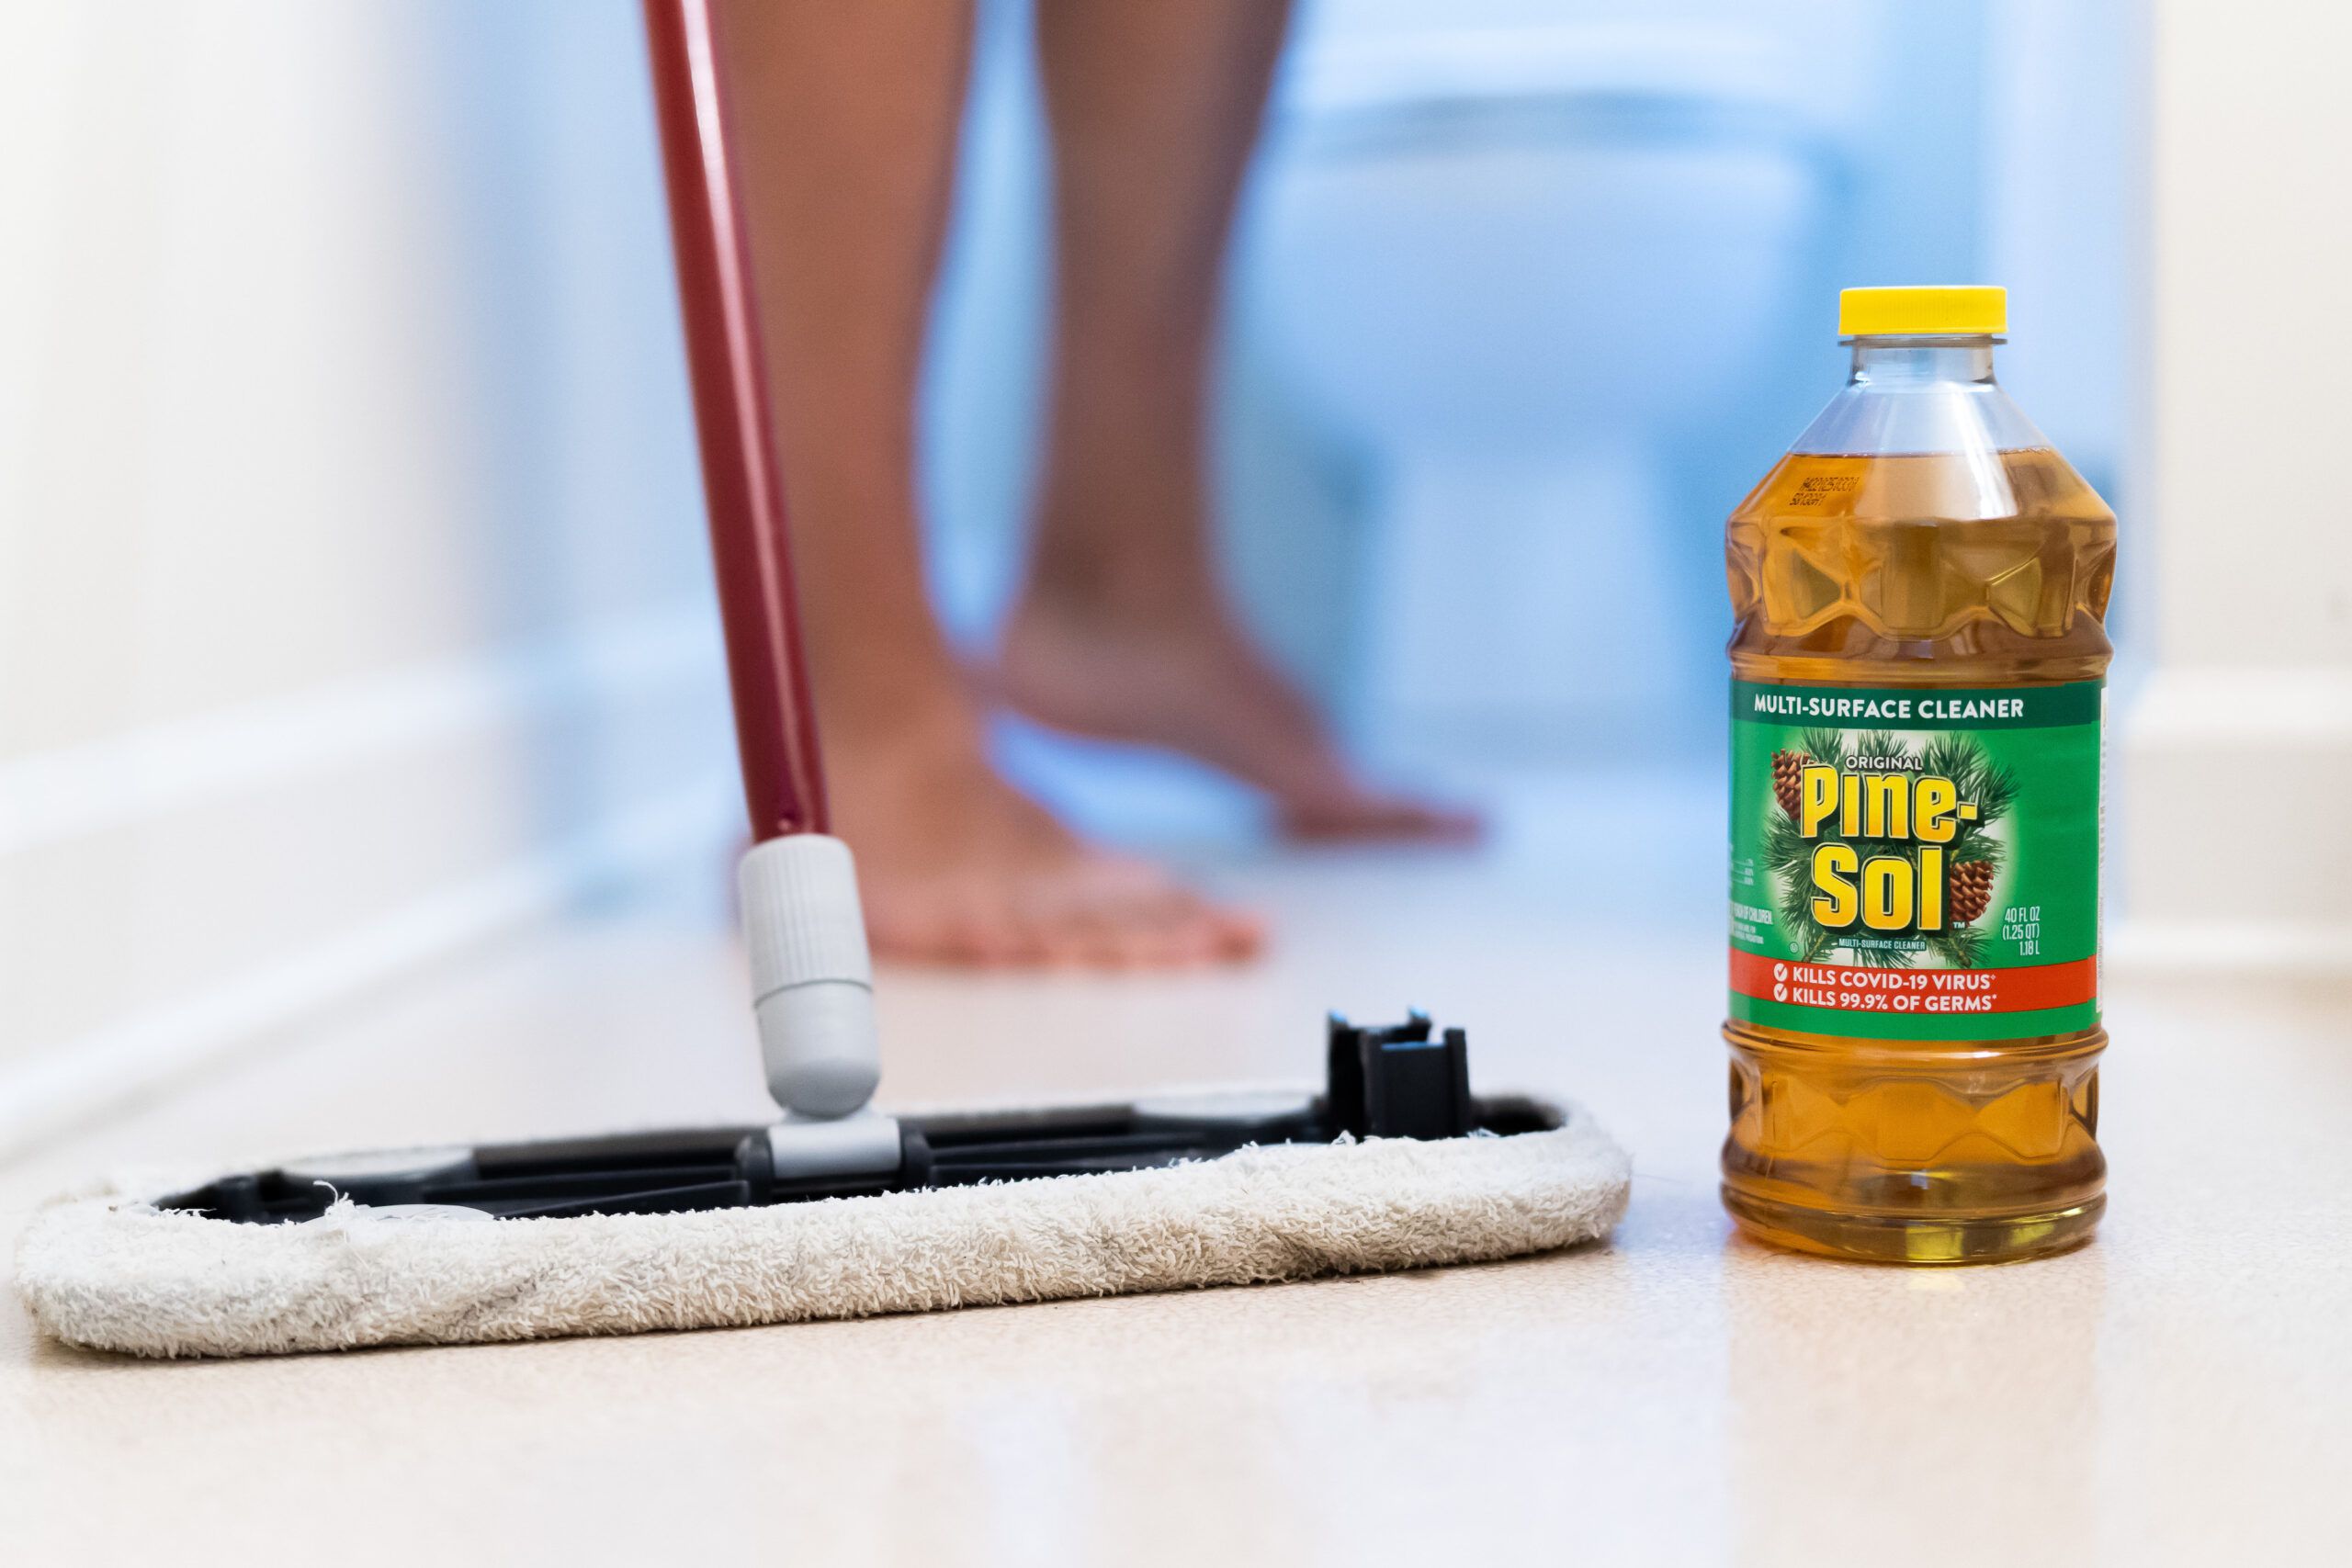 Can You Use Pine Sol on Epoxy Floors